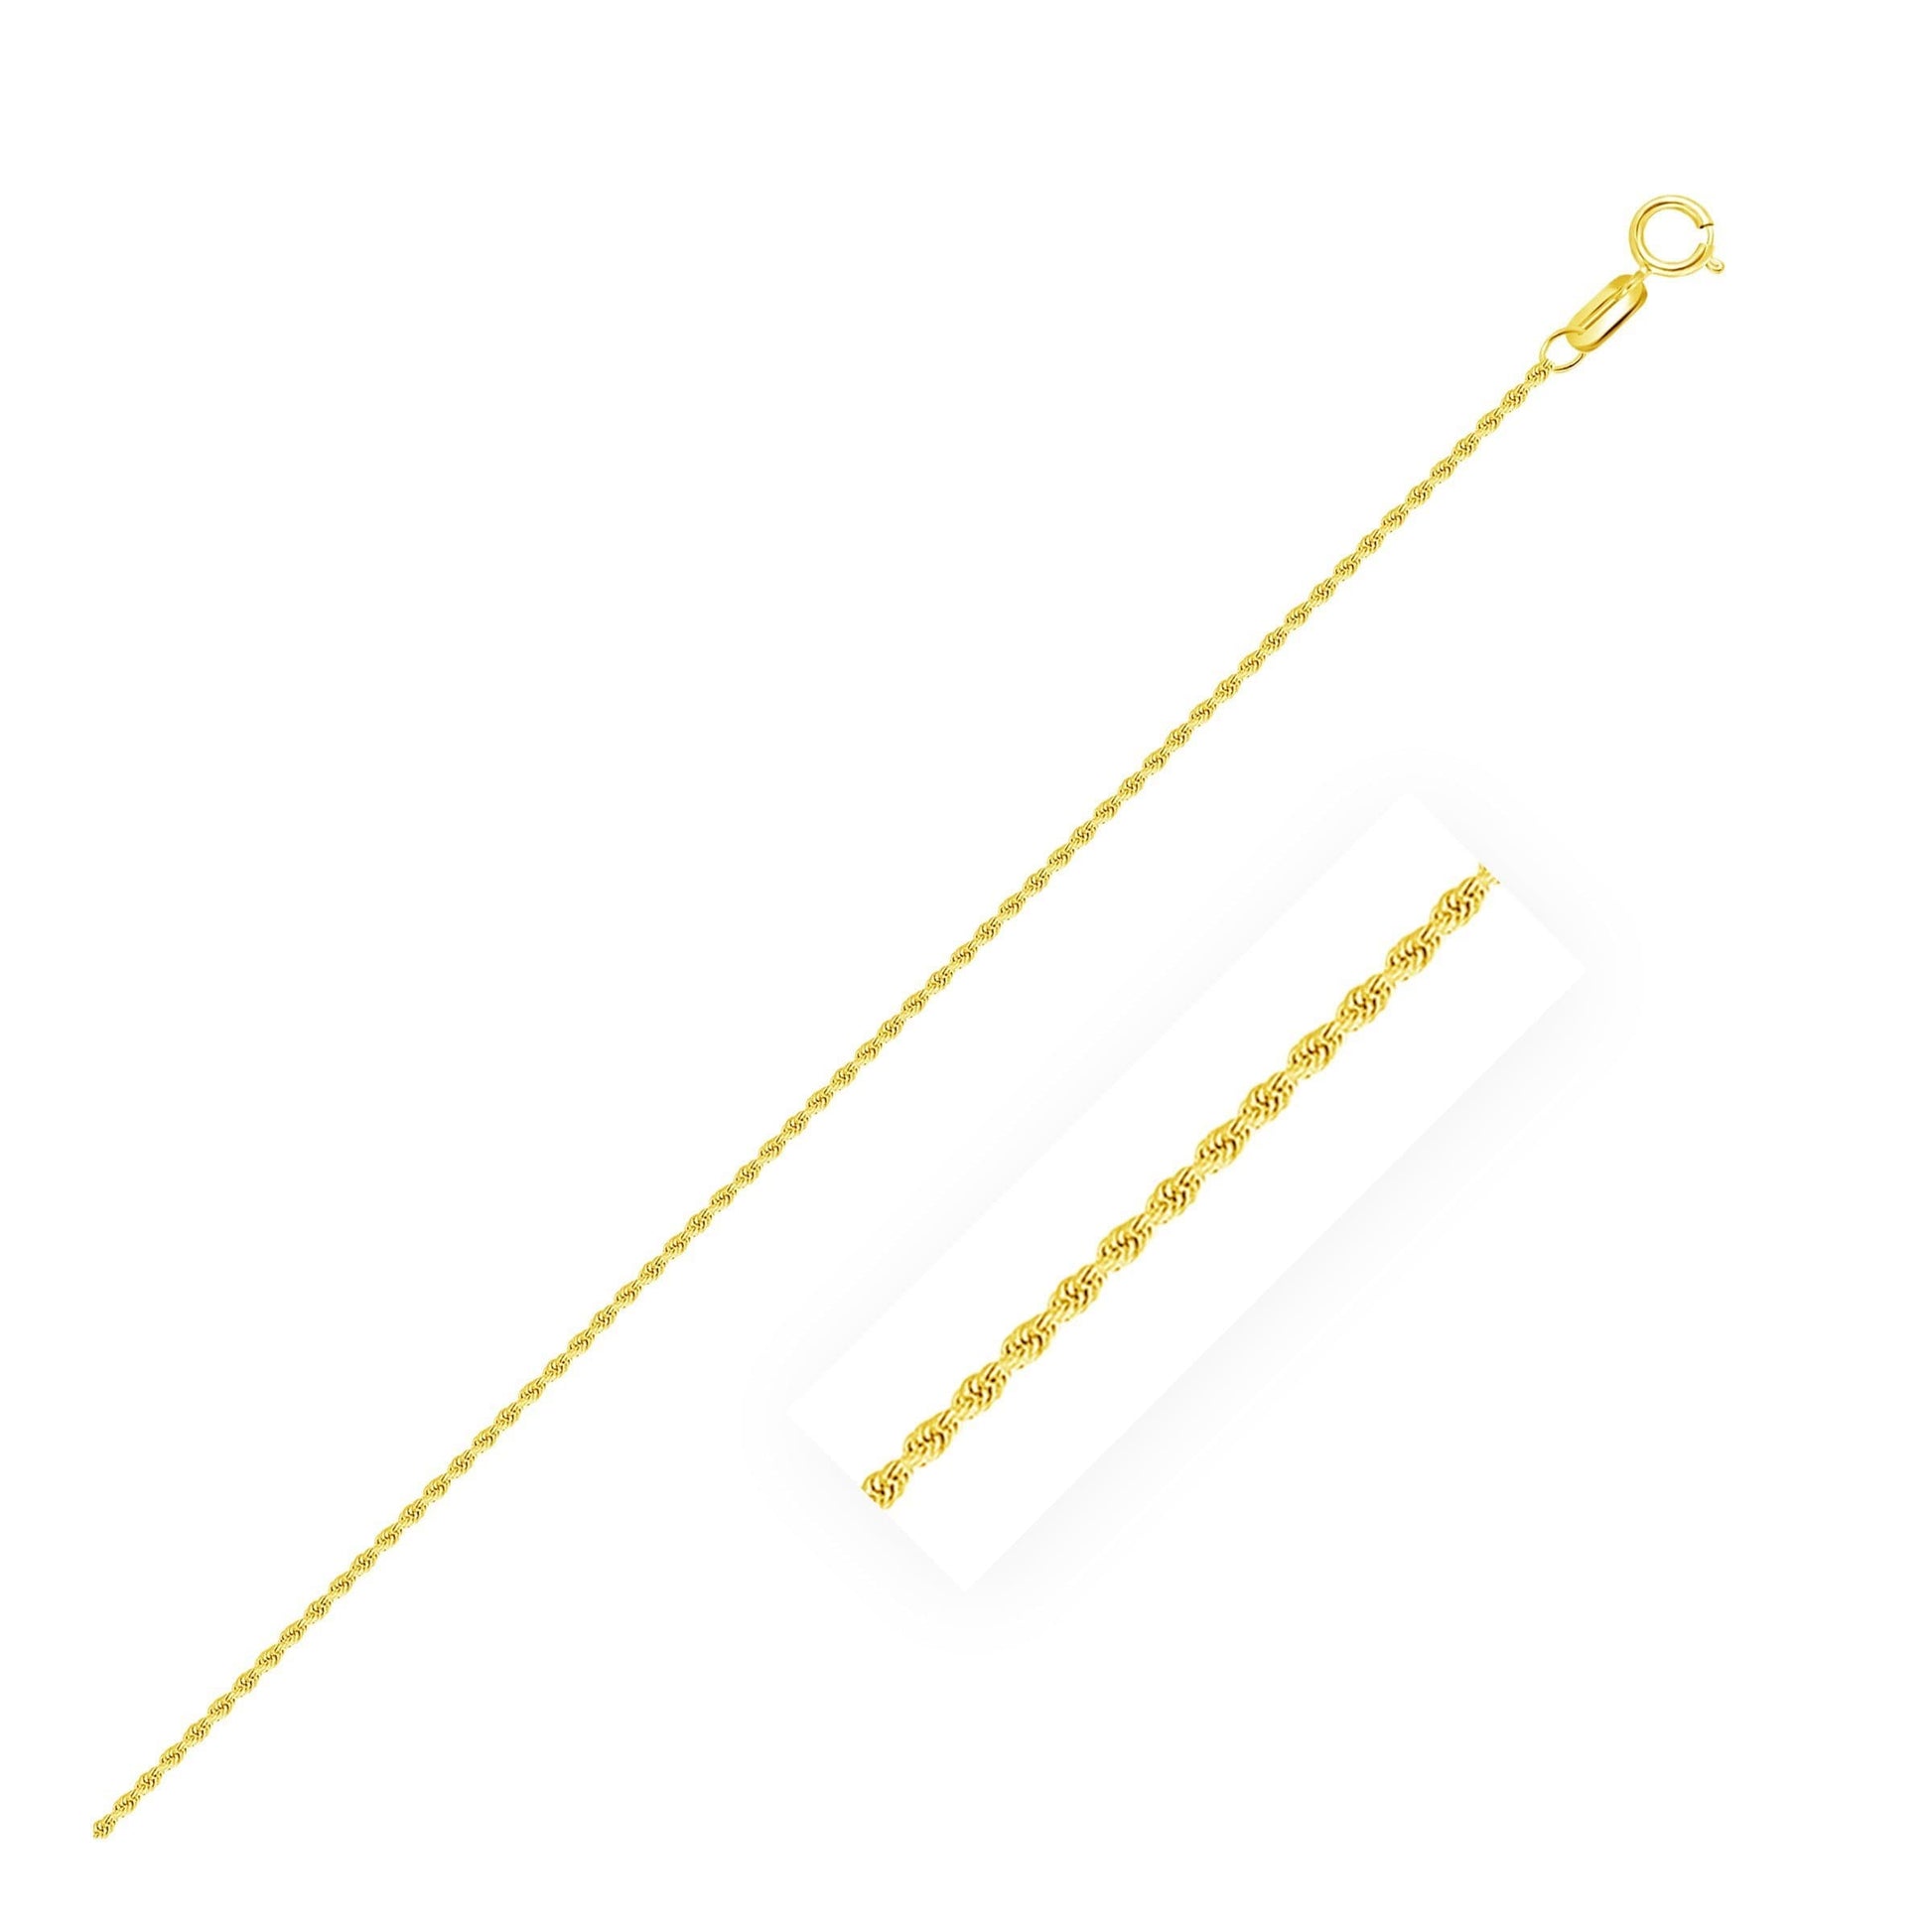 10k Yellow Gold Diamond Cut Rope Anklet 1.25mm